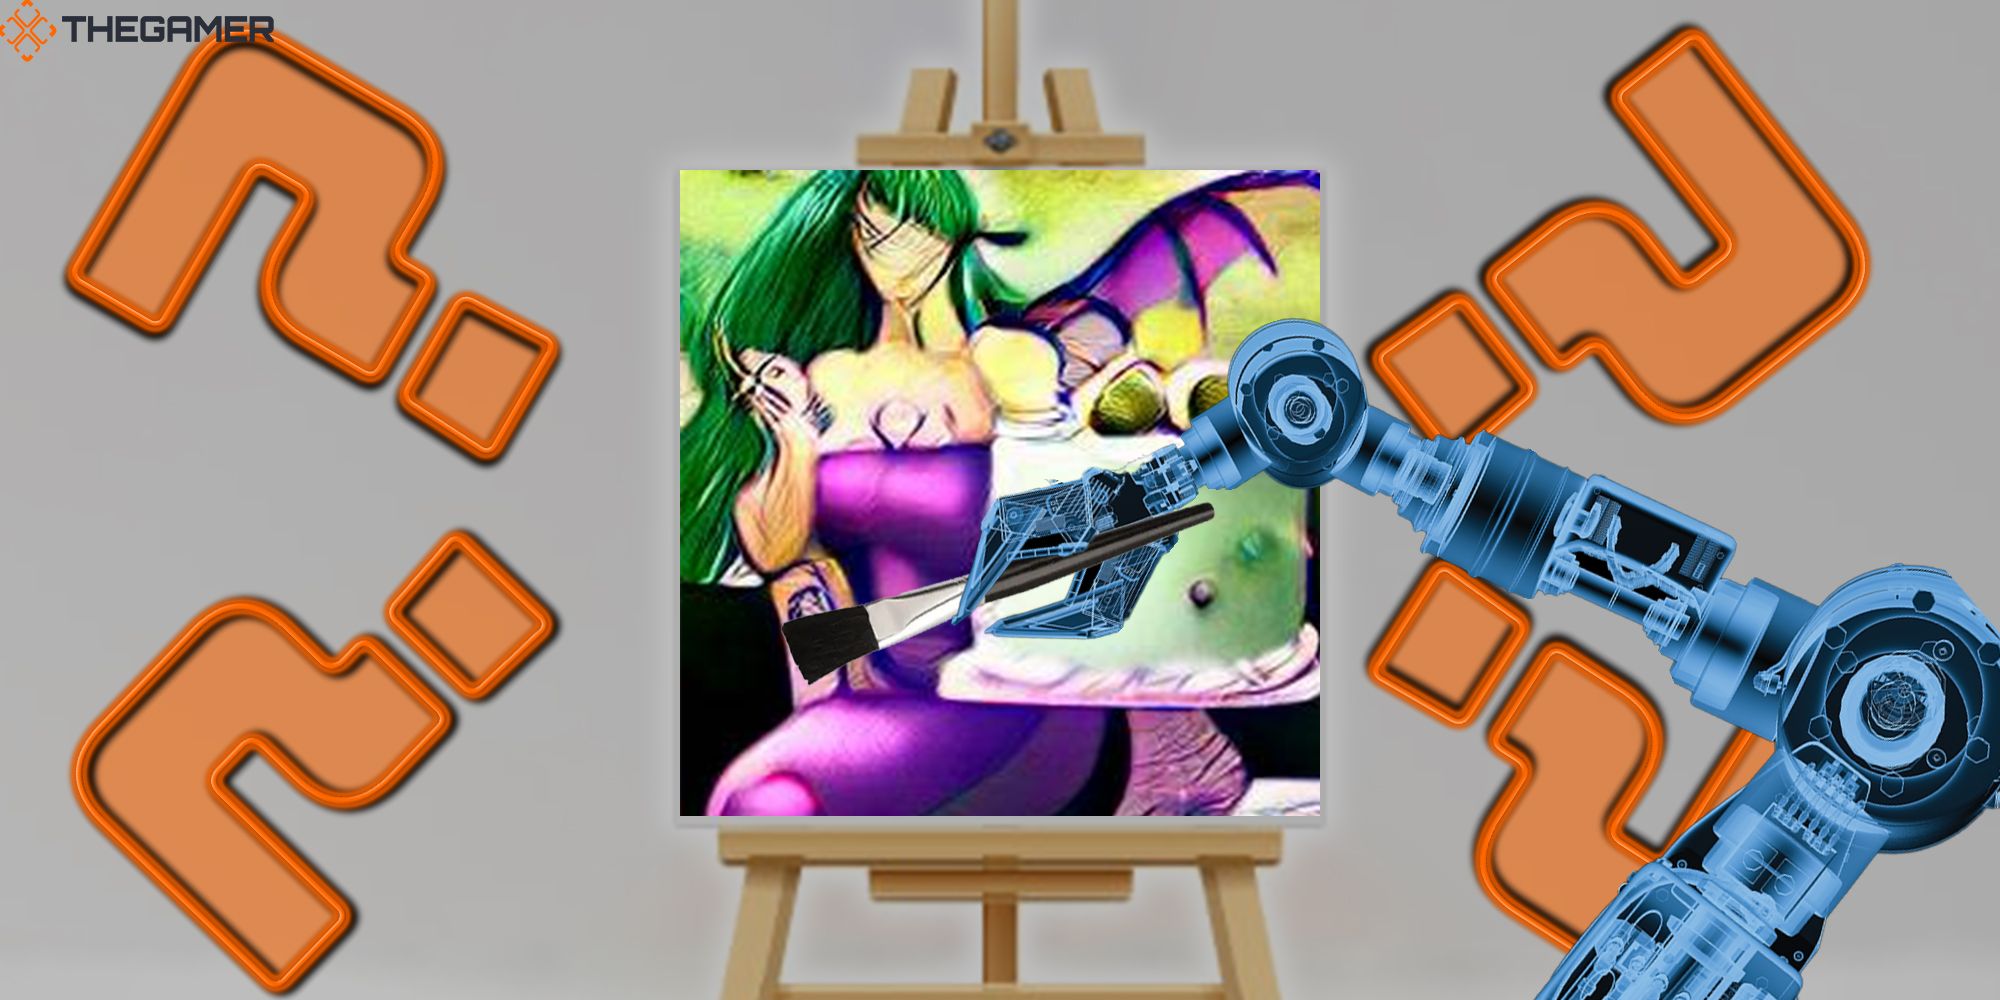 A robotic arm paints a portrait of Morrigan Aensland holding a cake. The easel that the robot is painting on is surrounded by four orange question marks.